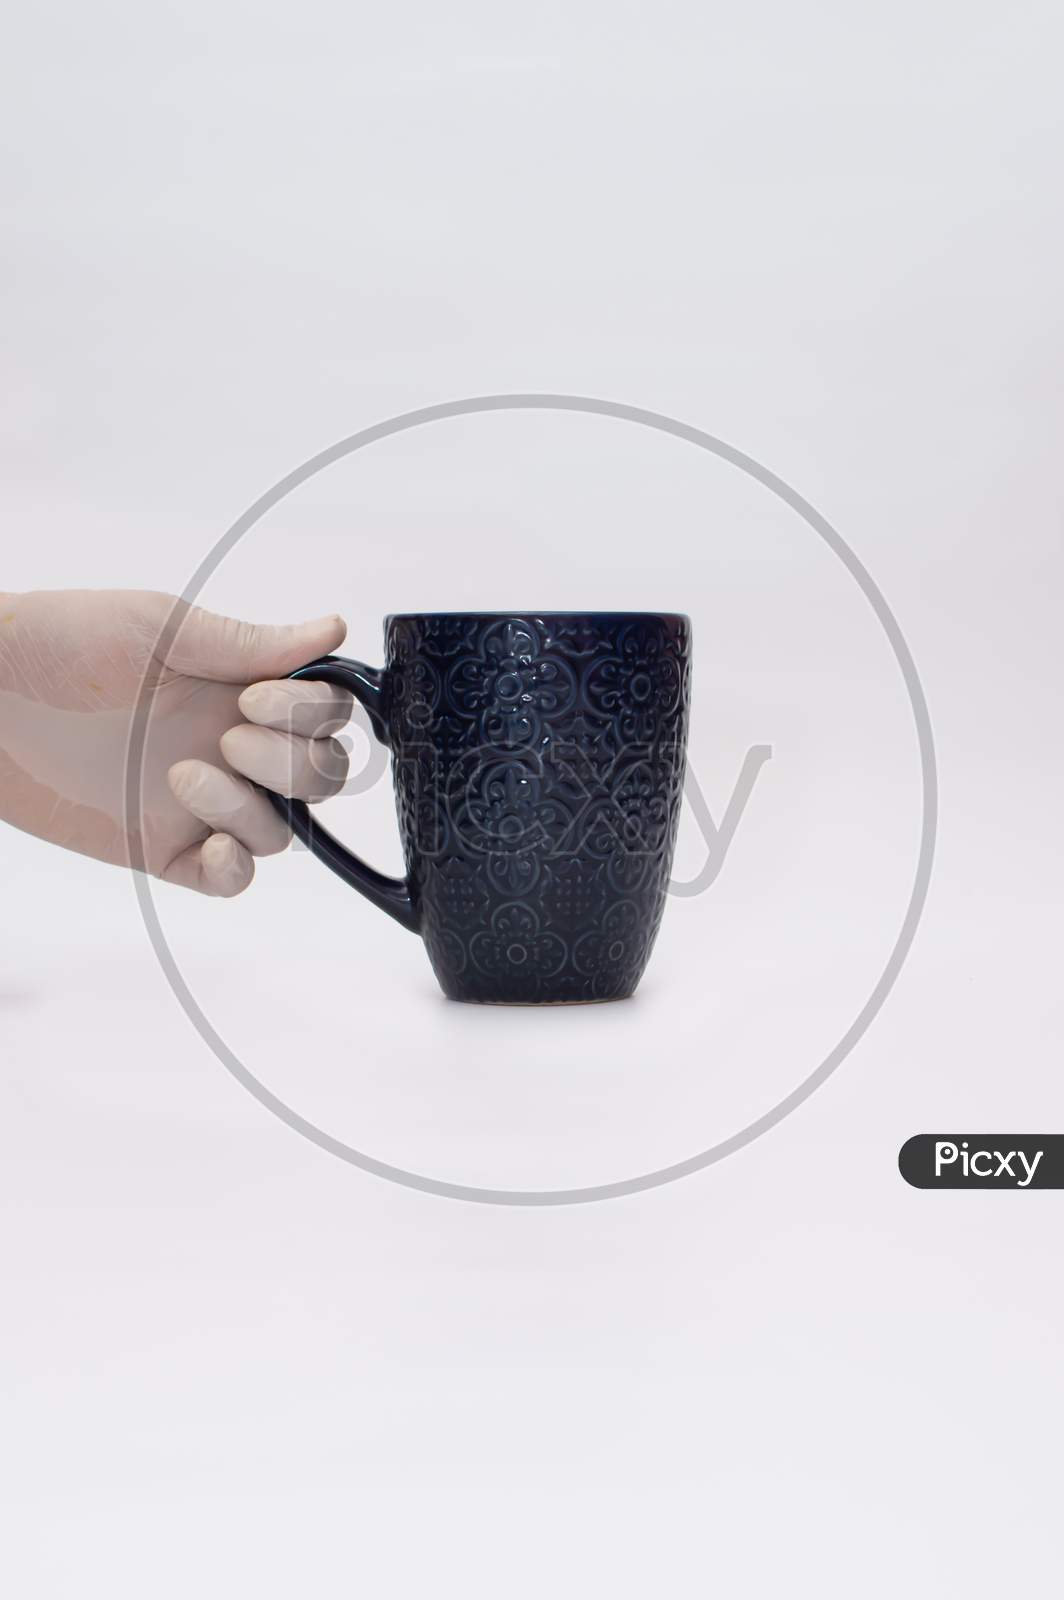 Hand with gloves holding handle of a mug